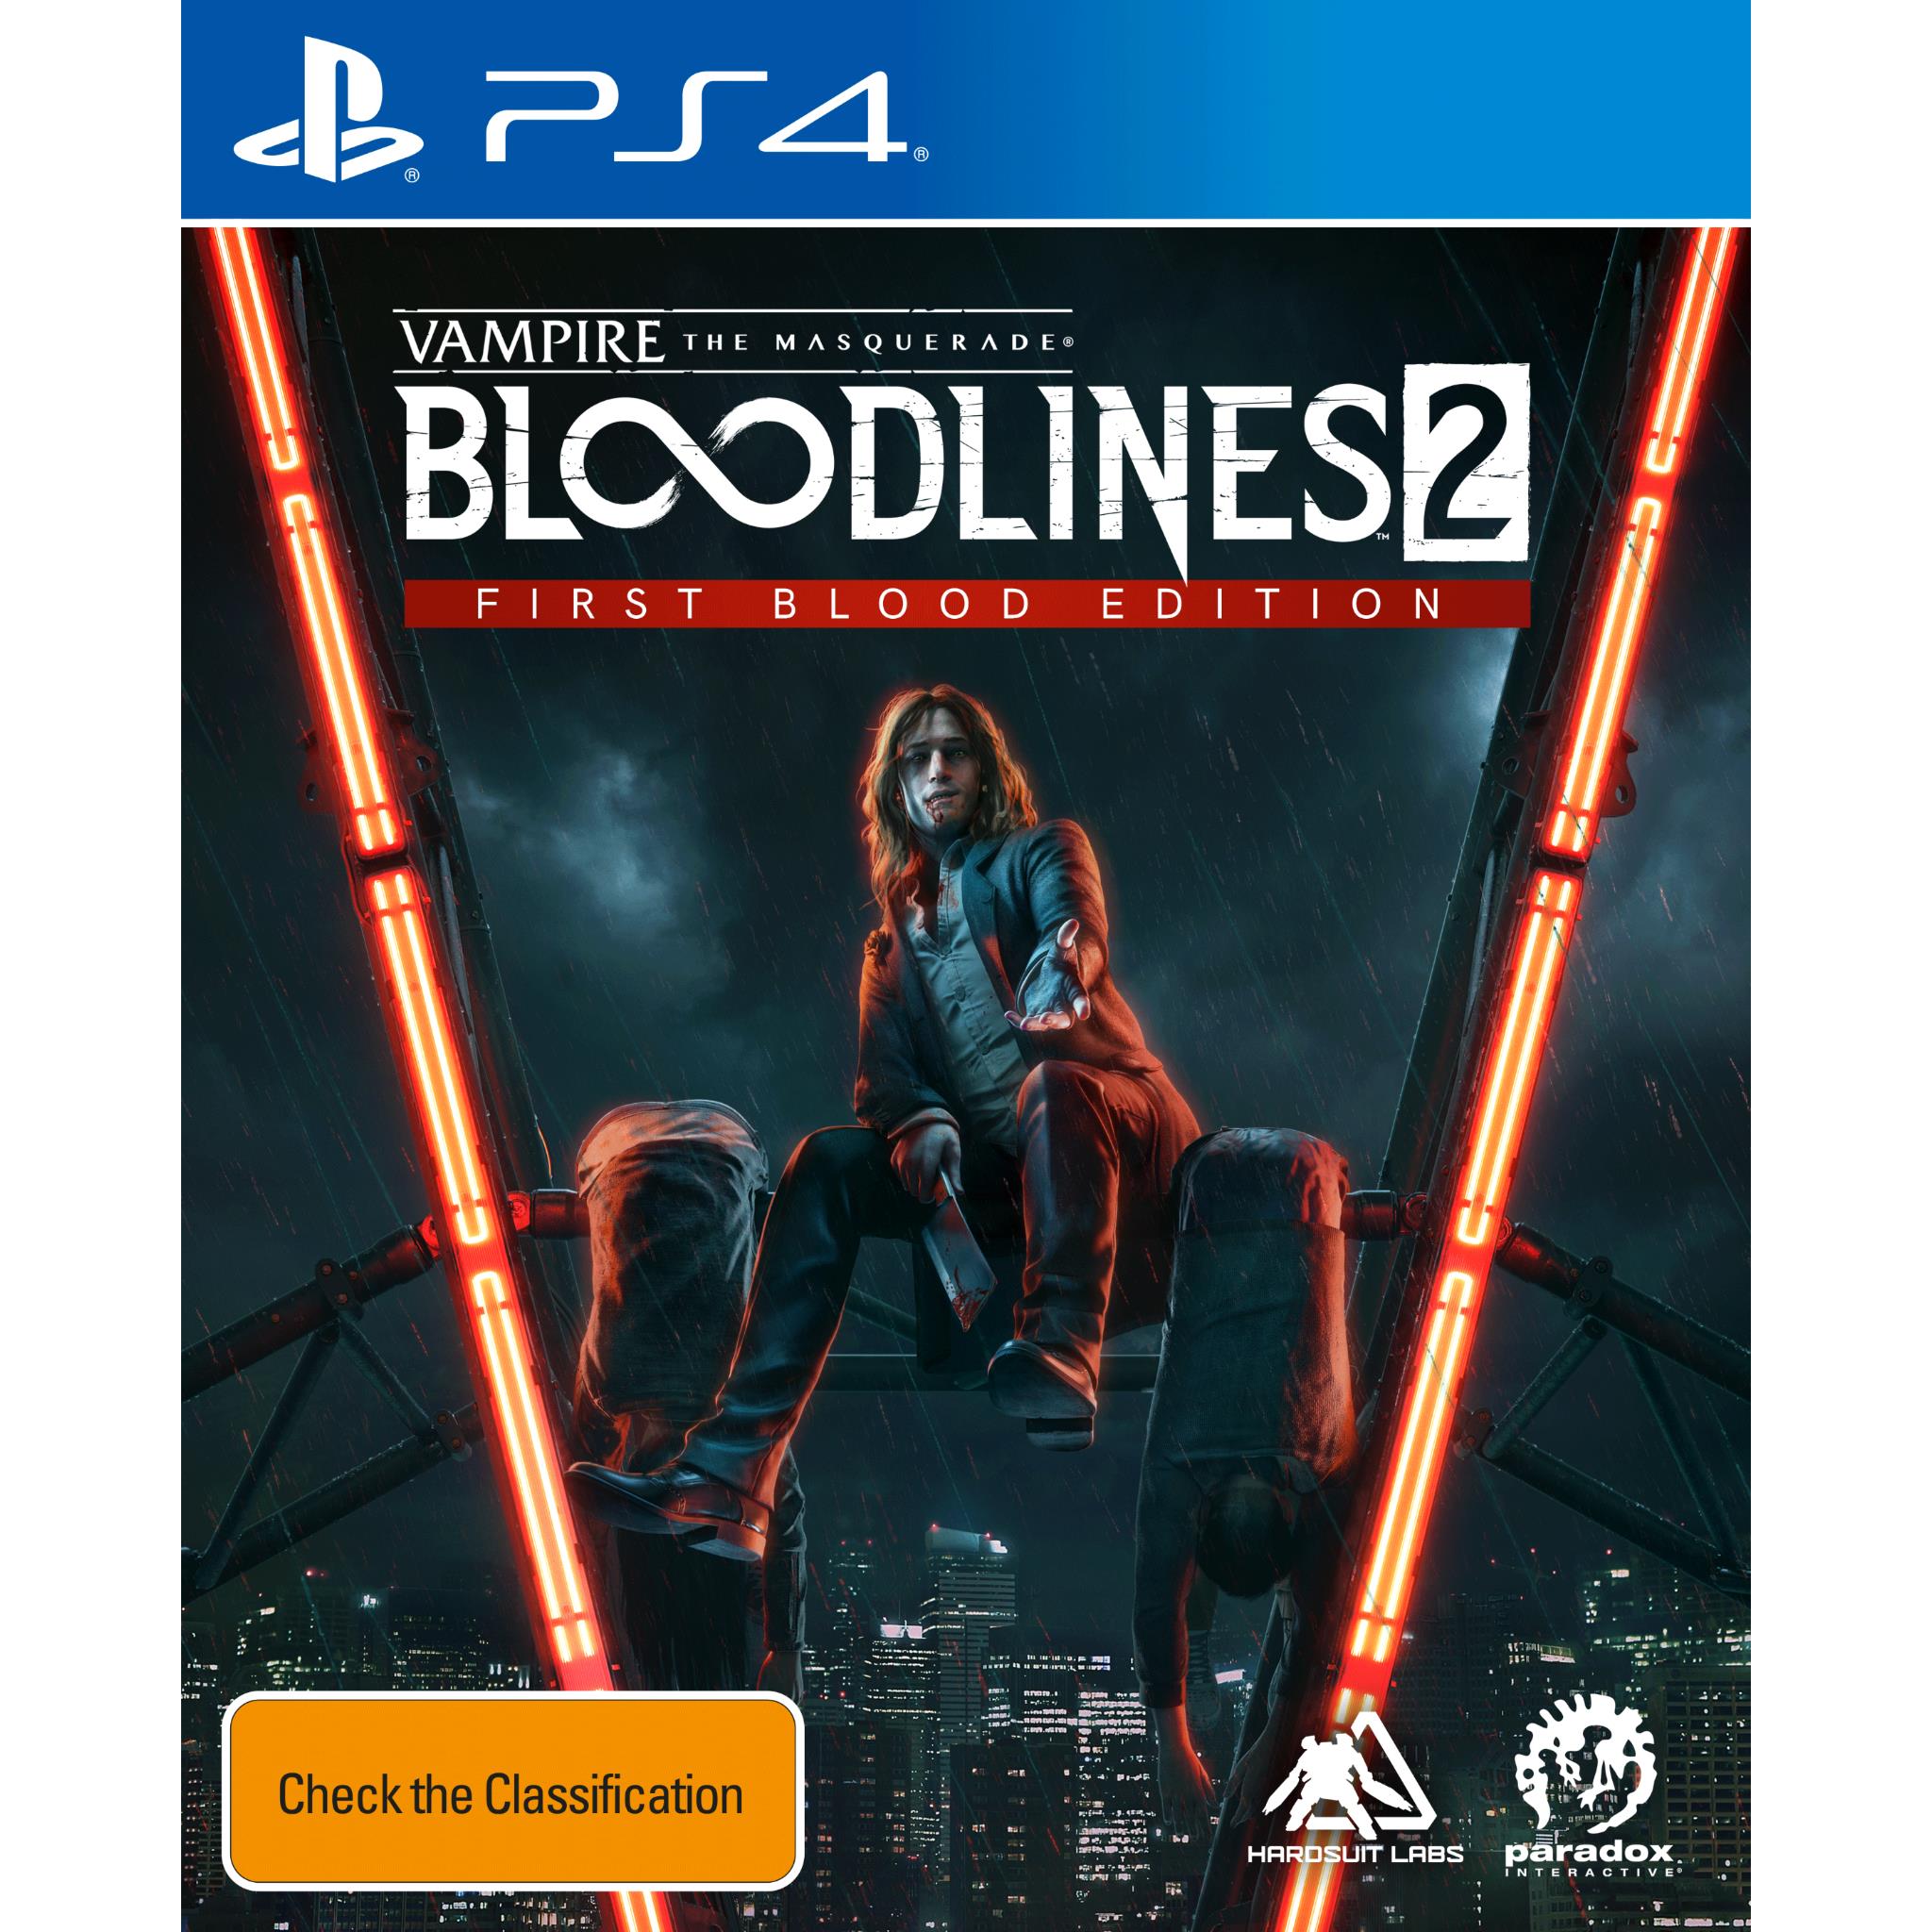 vampire: the masquerade bloodlines 2 first blood edition